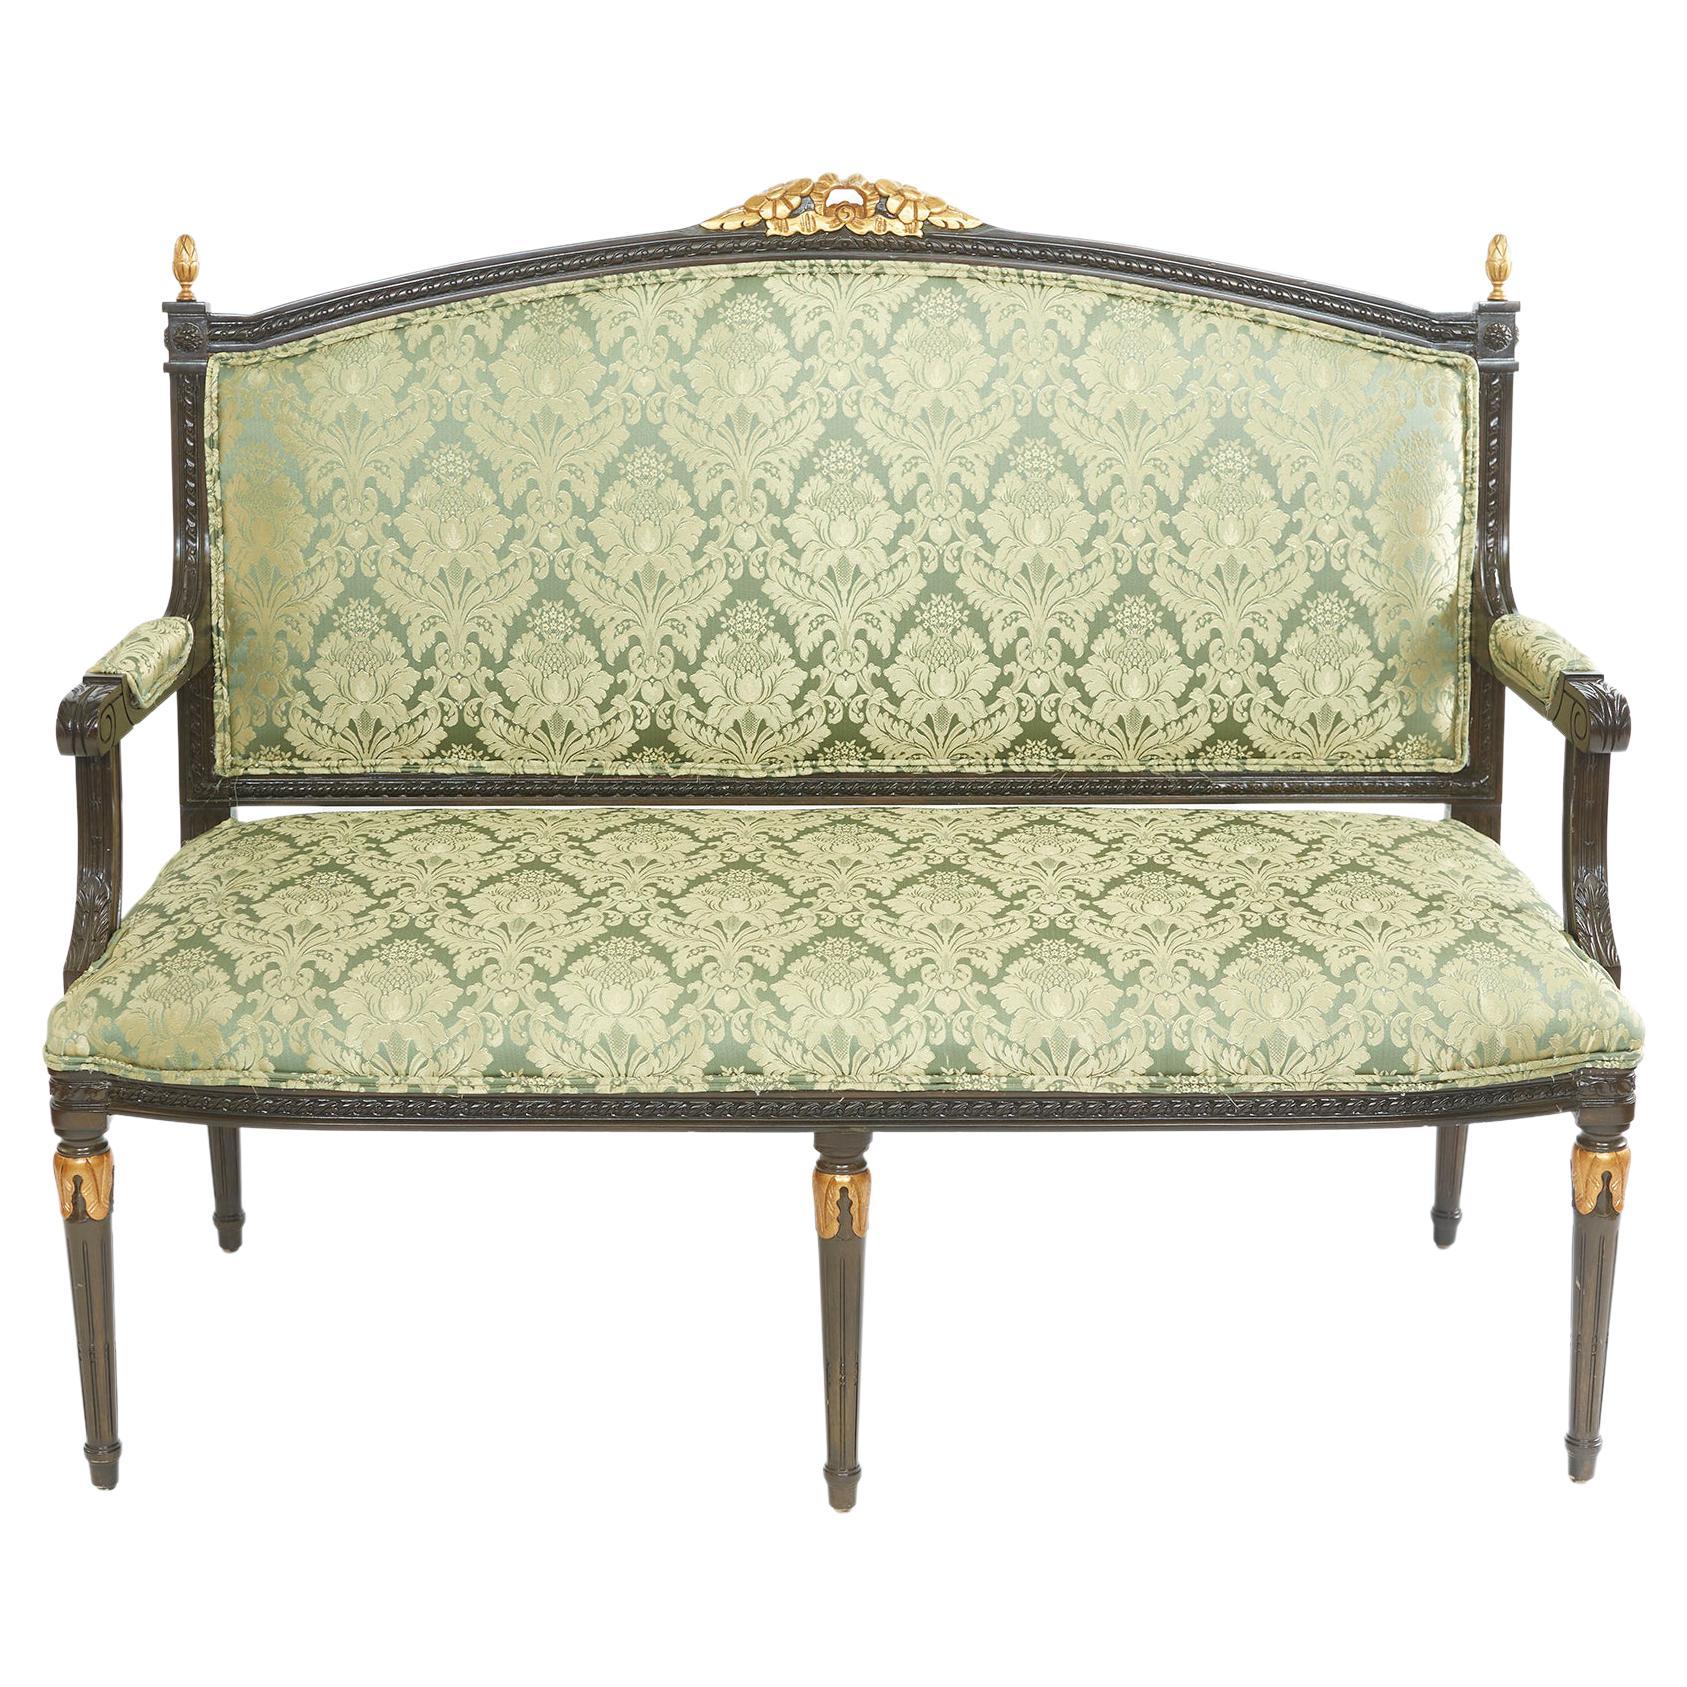 19th Century Painted / Giltwood Framed Settee